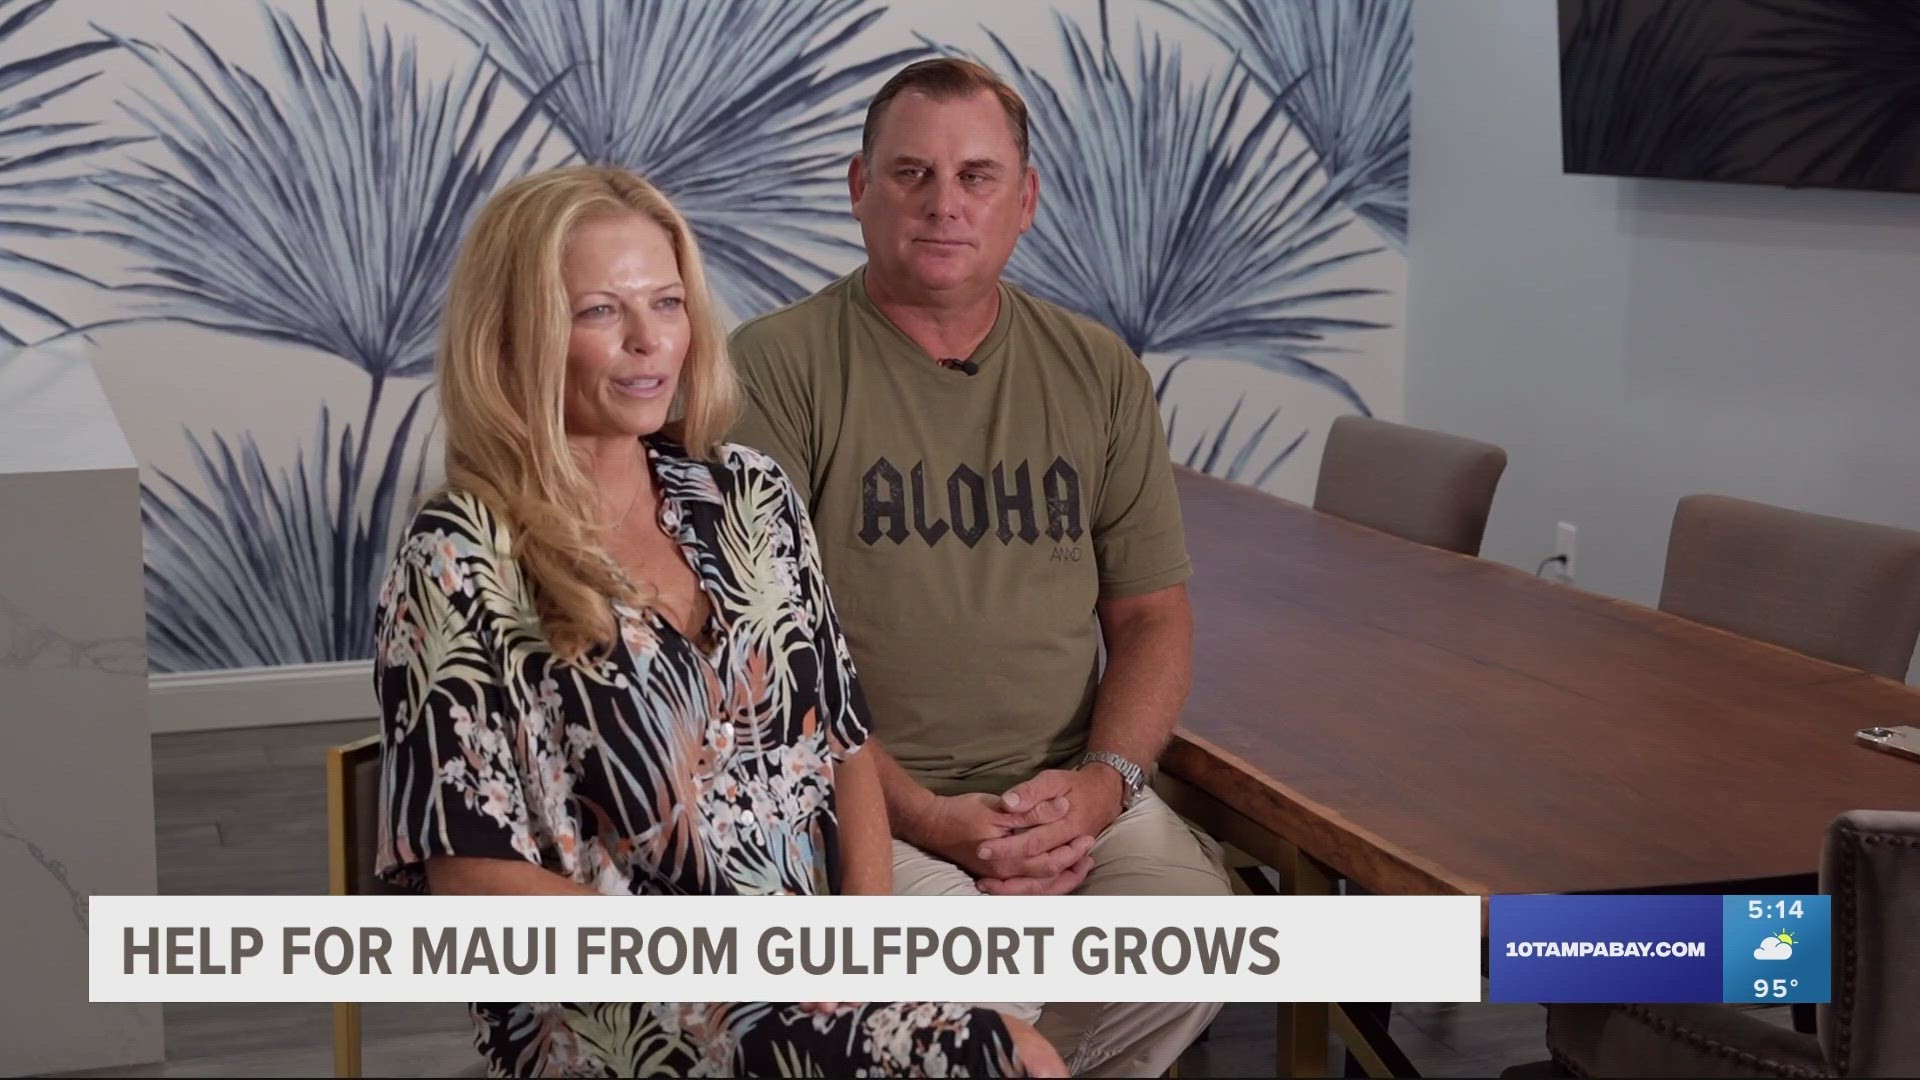 With fundraising in Florida and distribution efforts in Maui, this couple is coordinating aid delivery.